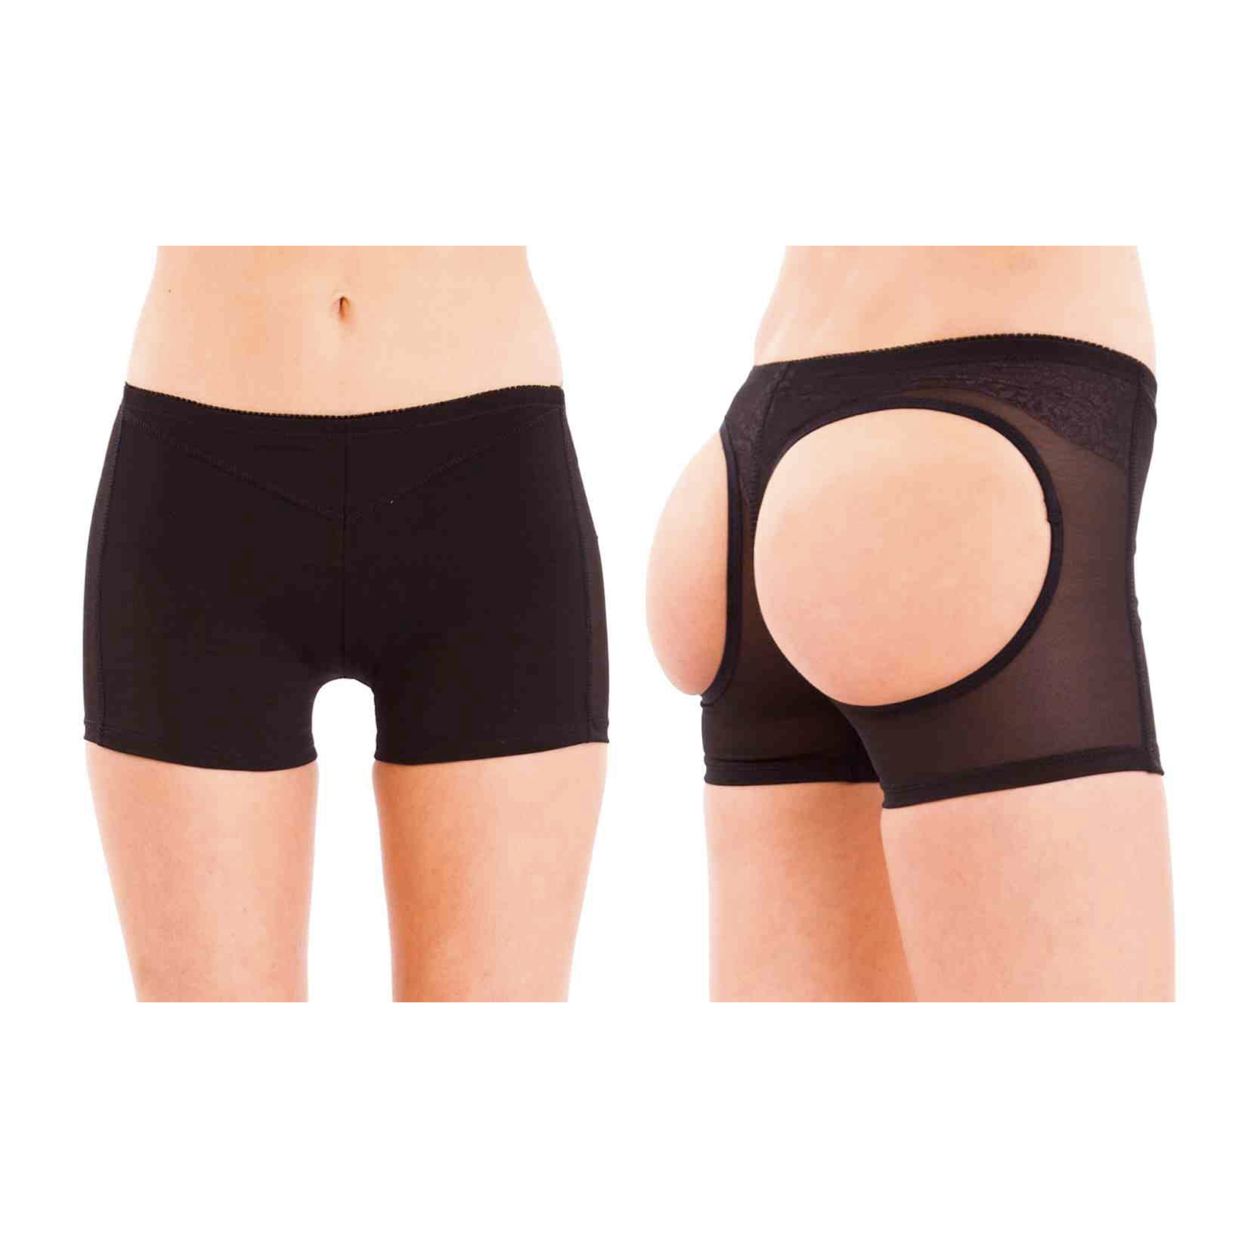 Women's Butt-Lifting And Tummy-Control Brief - Black, XL